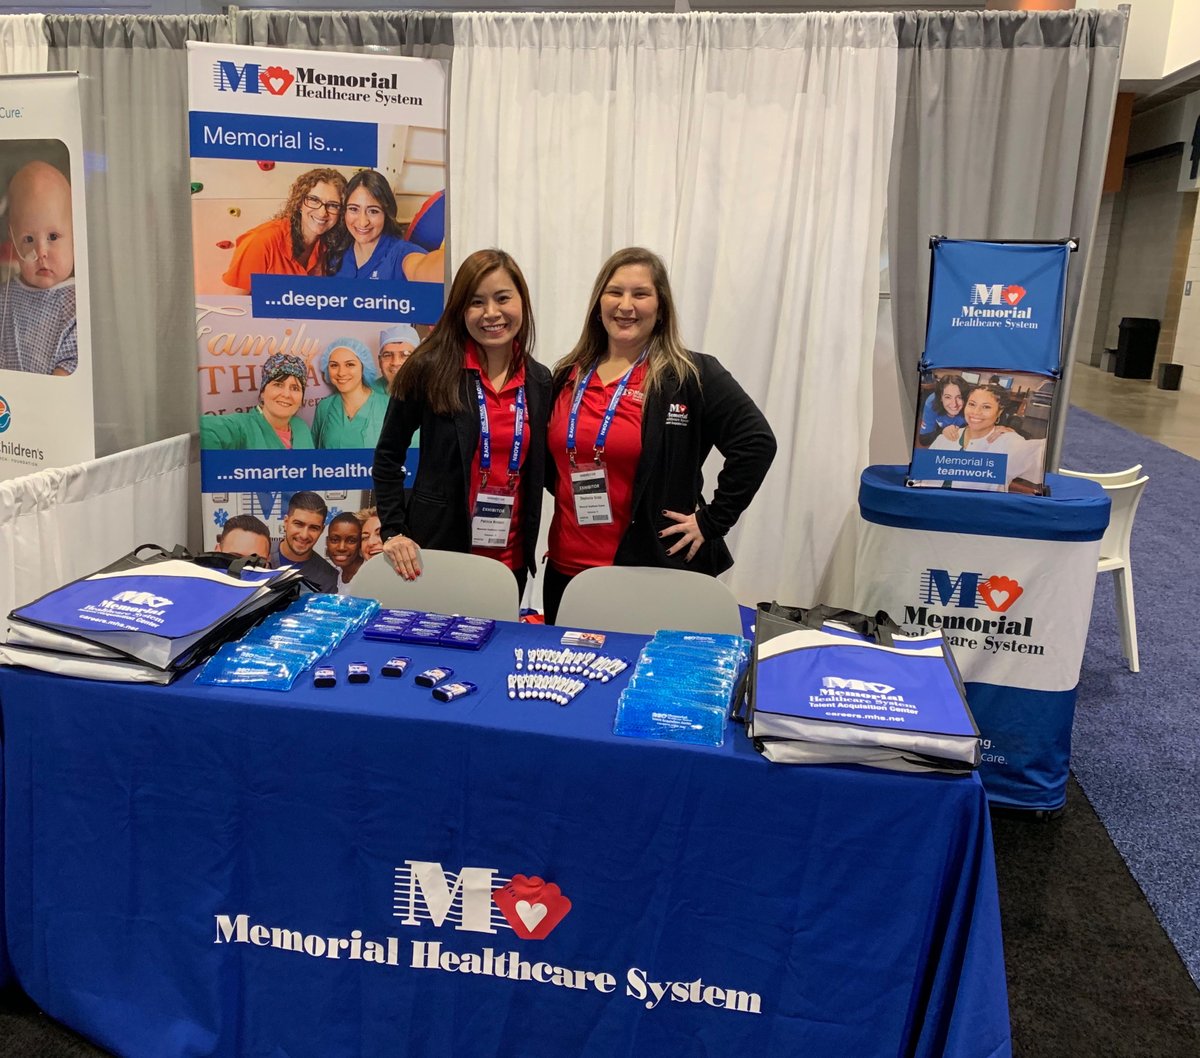 OR Nurses: #teamMHSflorida will be attending this year’s @aorn Global Surgical Conference. Join us at booth 2163 to discover what opportunities await you at Memorial. #memorialisme. bit.ly/2WWKqqR